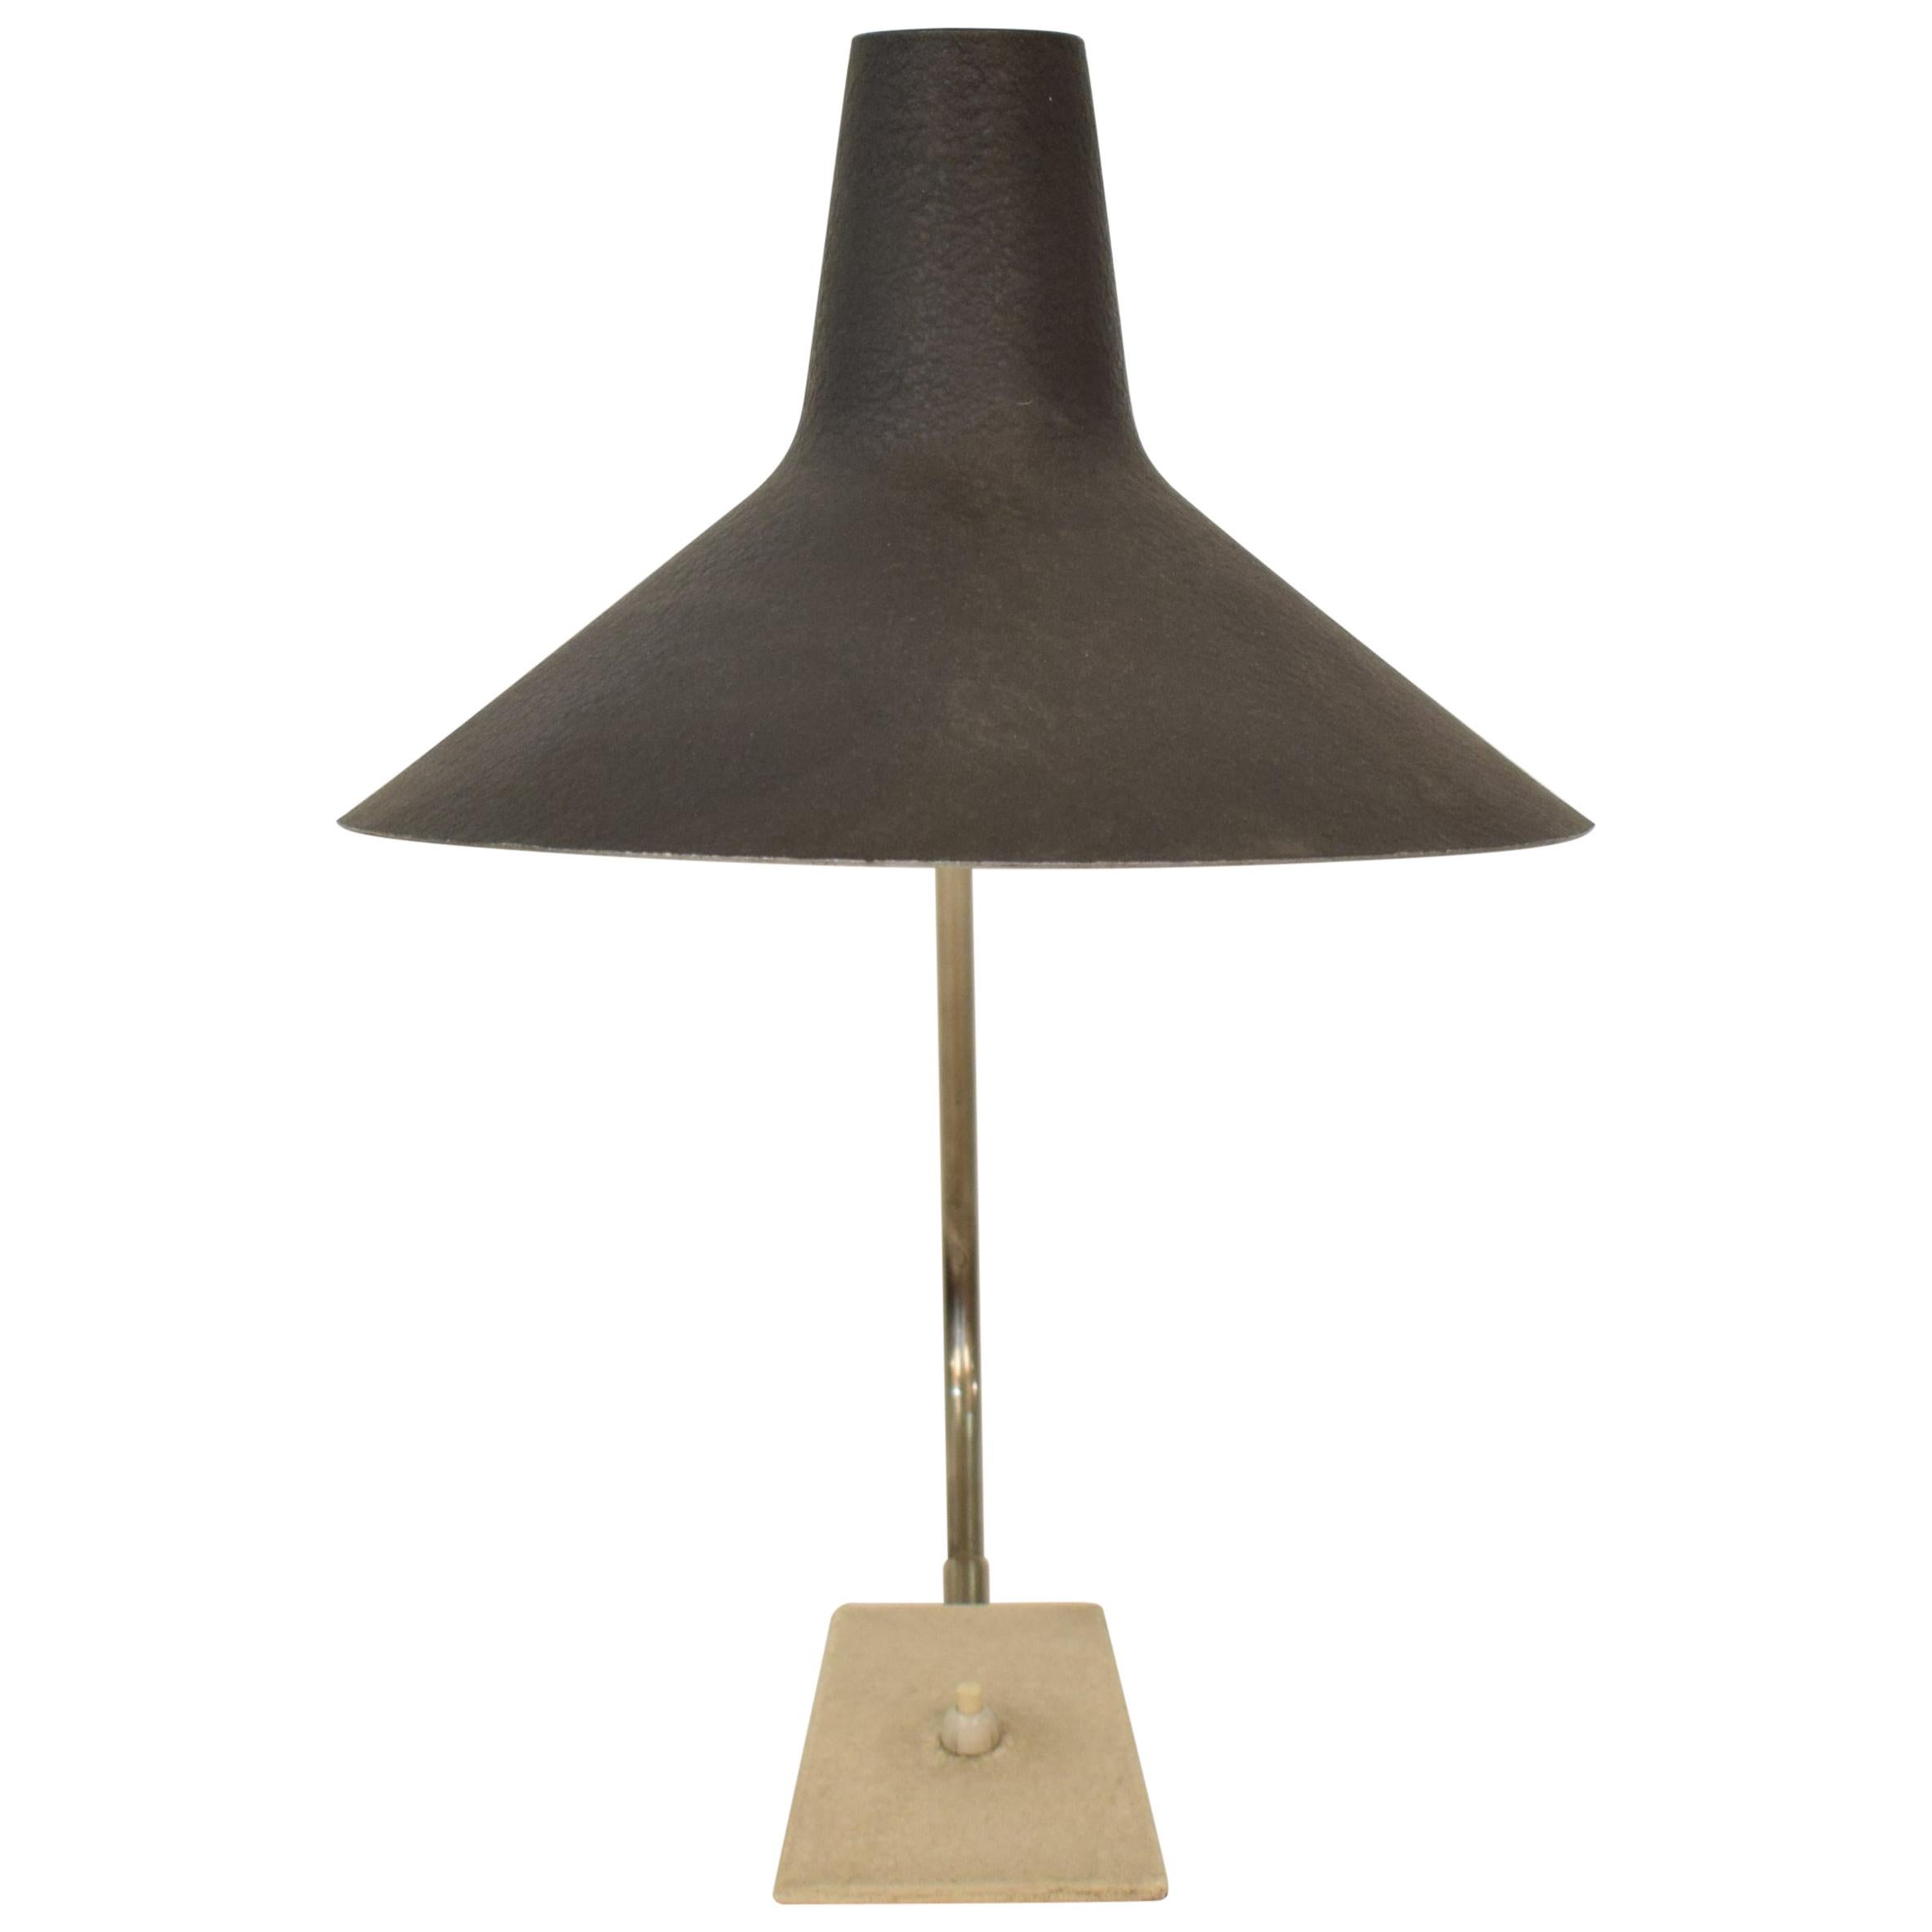 Midcentury German Grey, Chrome and White Table Lamp by Gebrüder Cosack, 1950s For Sale